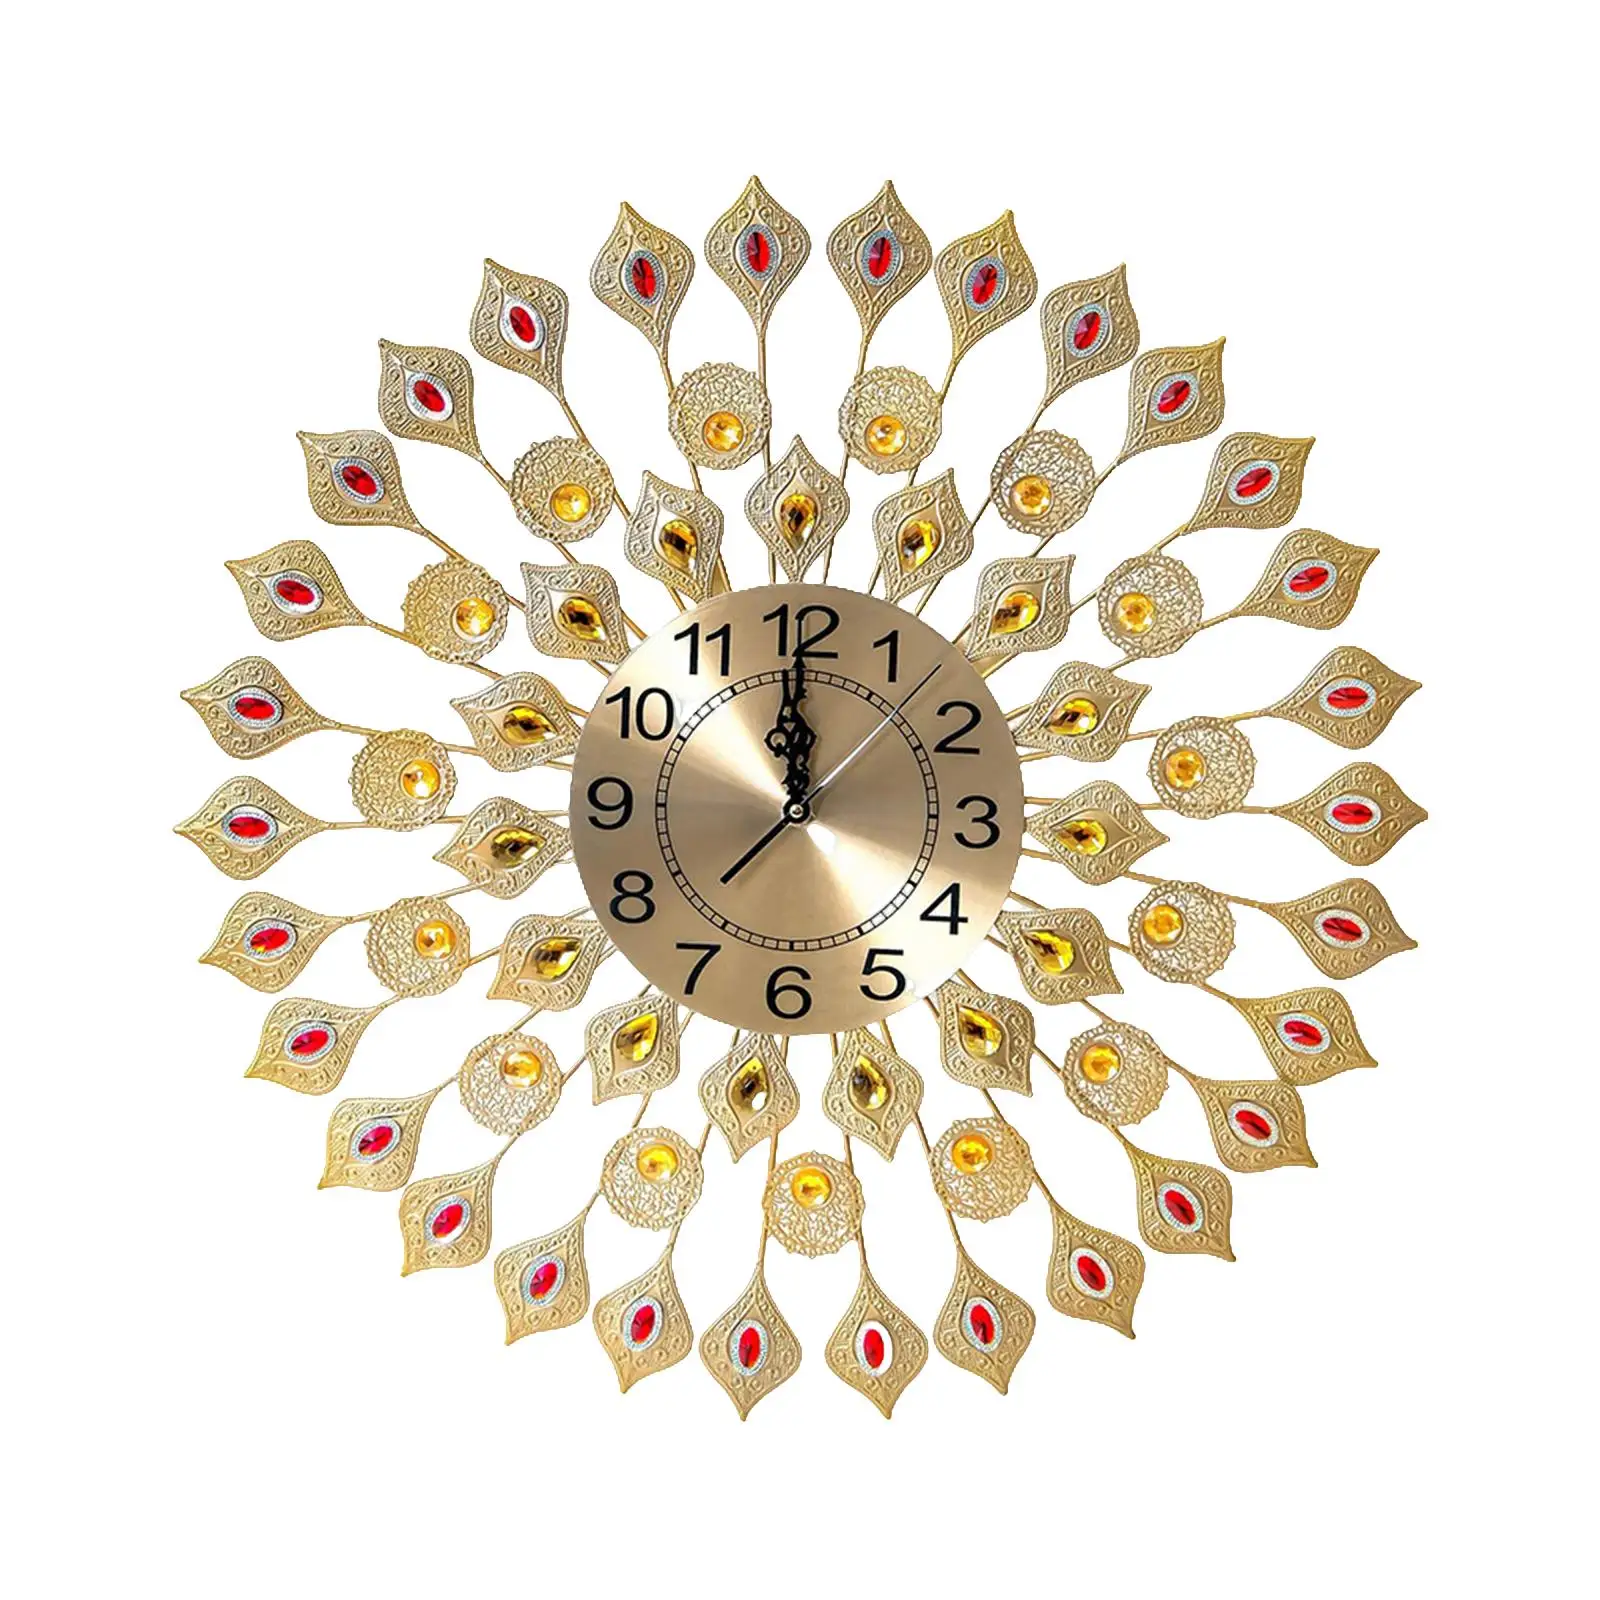 Large Peacock Wall Clock Big Wall Clock Unique Metal Non Ticking Wall Watch Ornament for Home Kitchen Bedroom Office Decoration